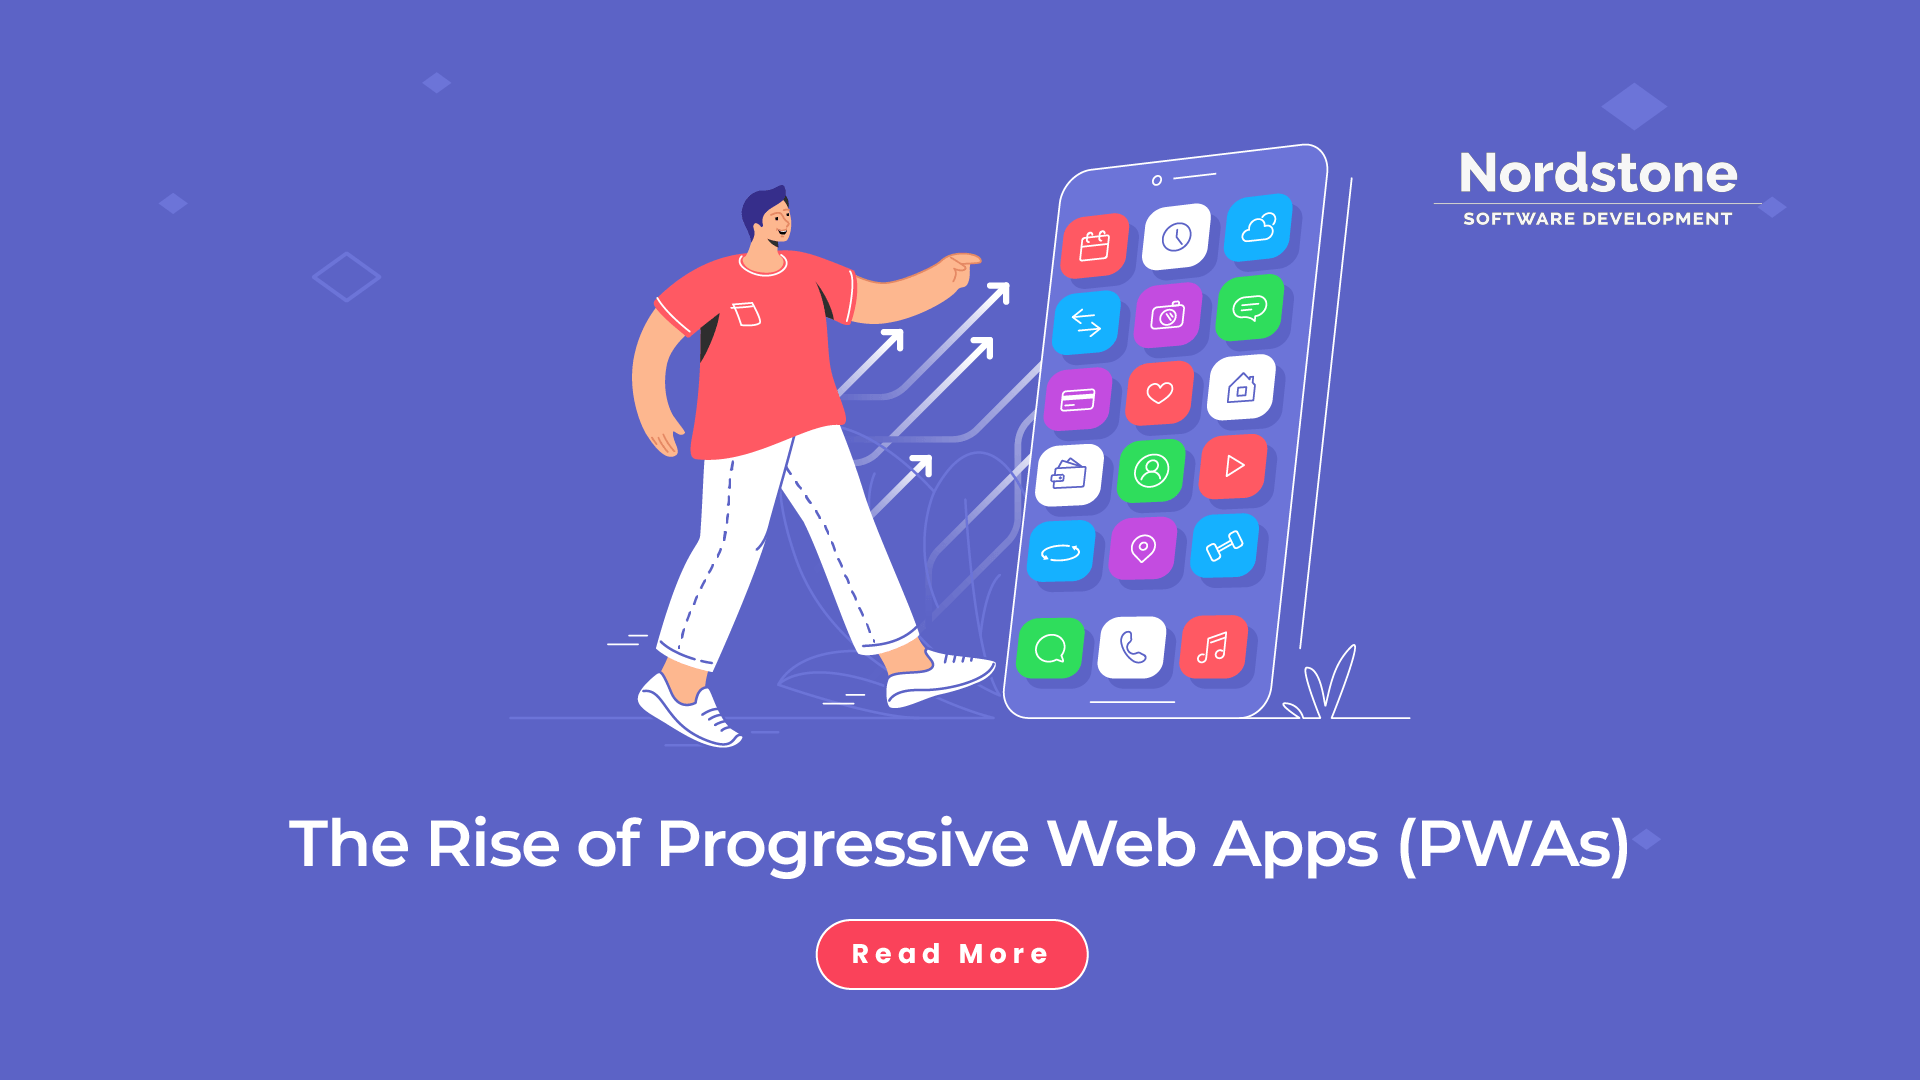 The Rise of Progressive Web Apps (PWAs) Transforming the Mobile App Industry